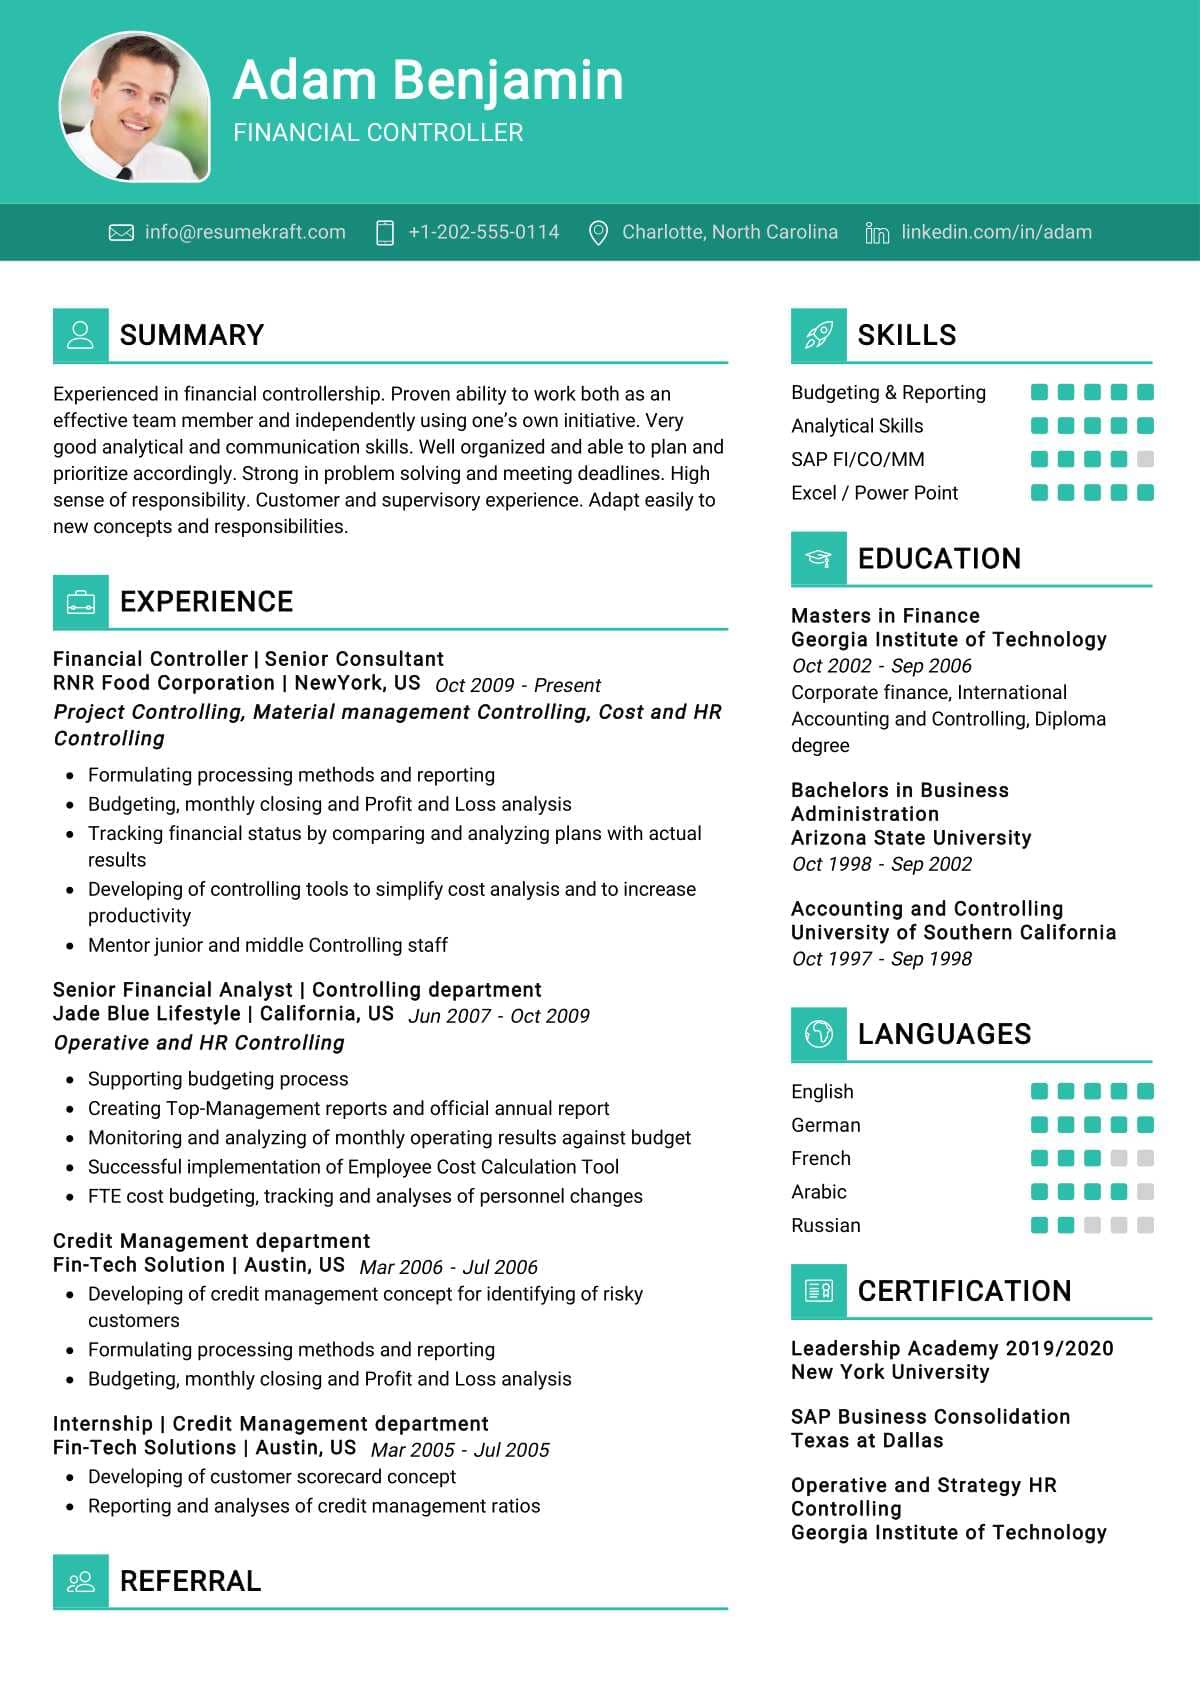 Financial Controller Resume Sample 10  Writing Tips - ResumeKraft Inside Financial Controller Job Description Template Throughout Financial Controller Job Description Template